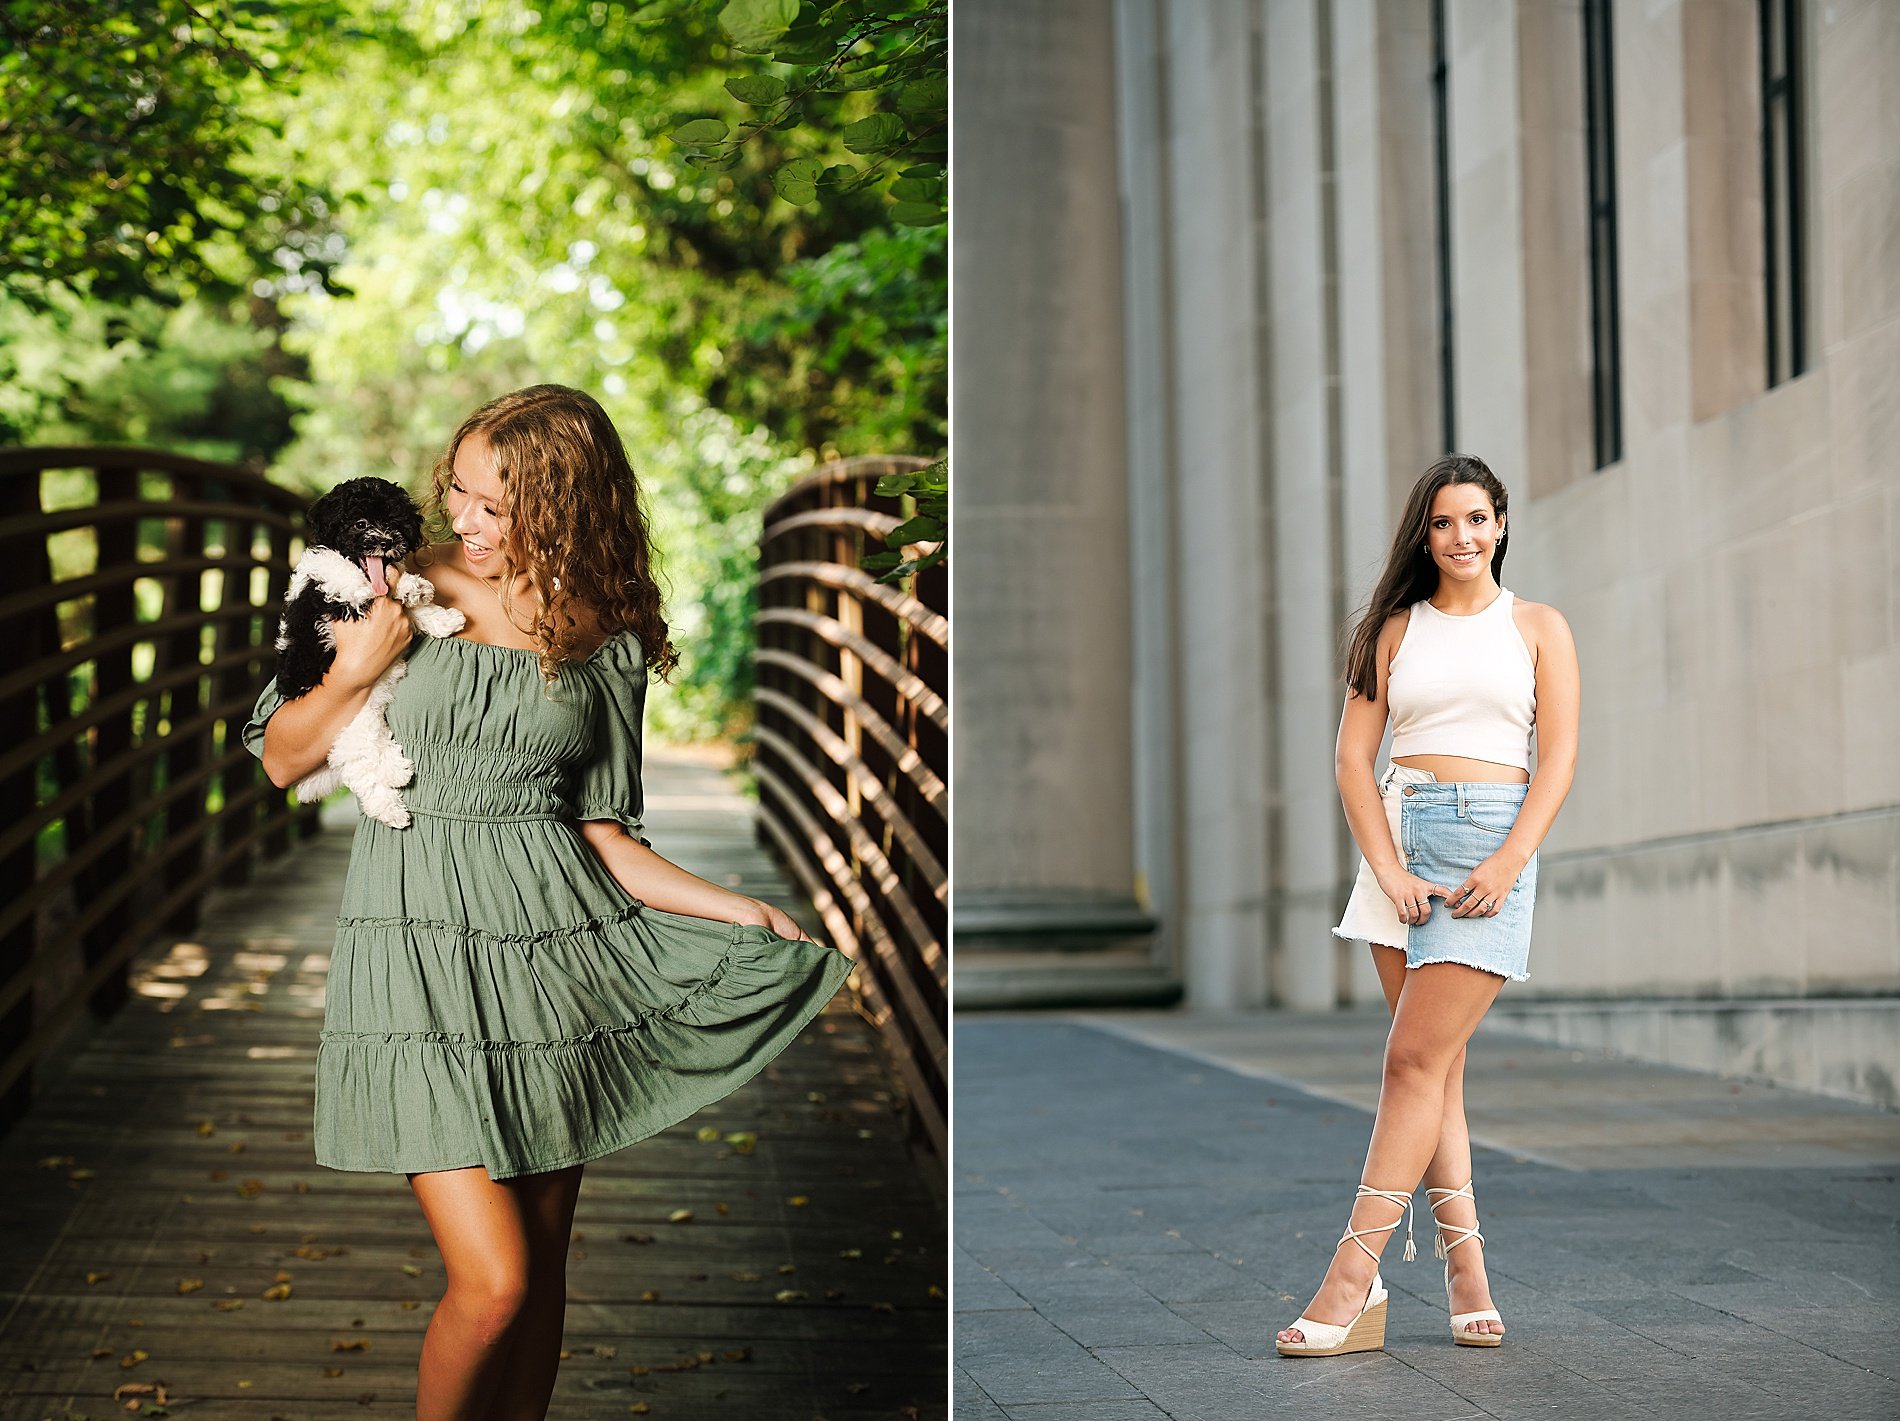  What Season is Right For Your Senior Session? 